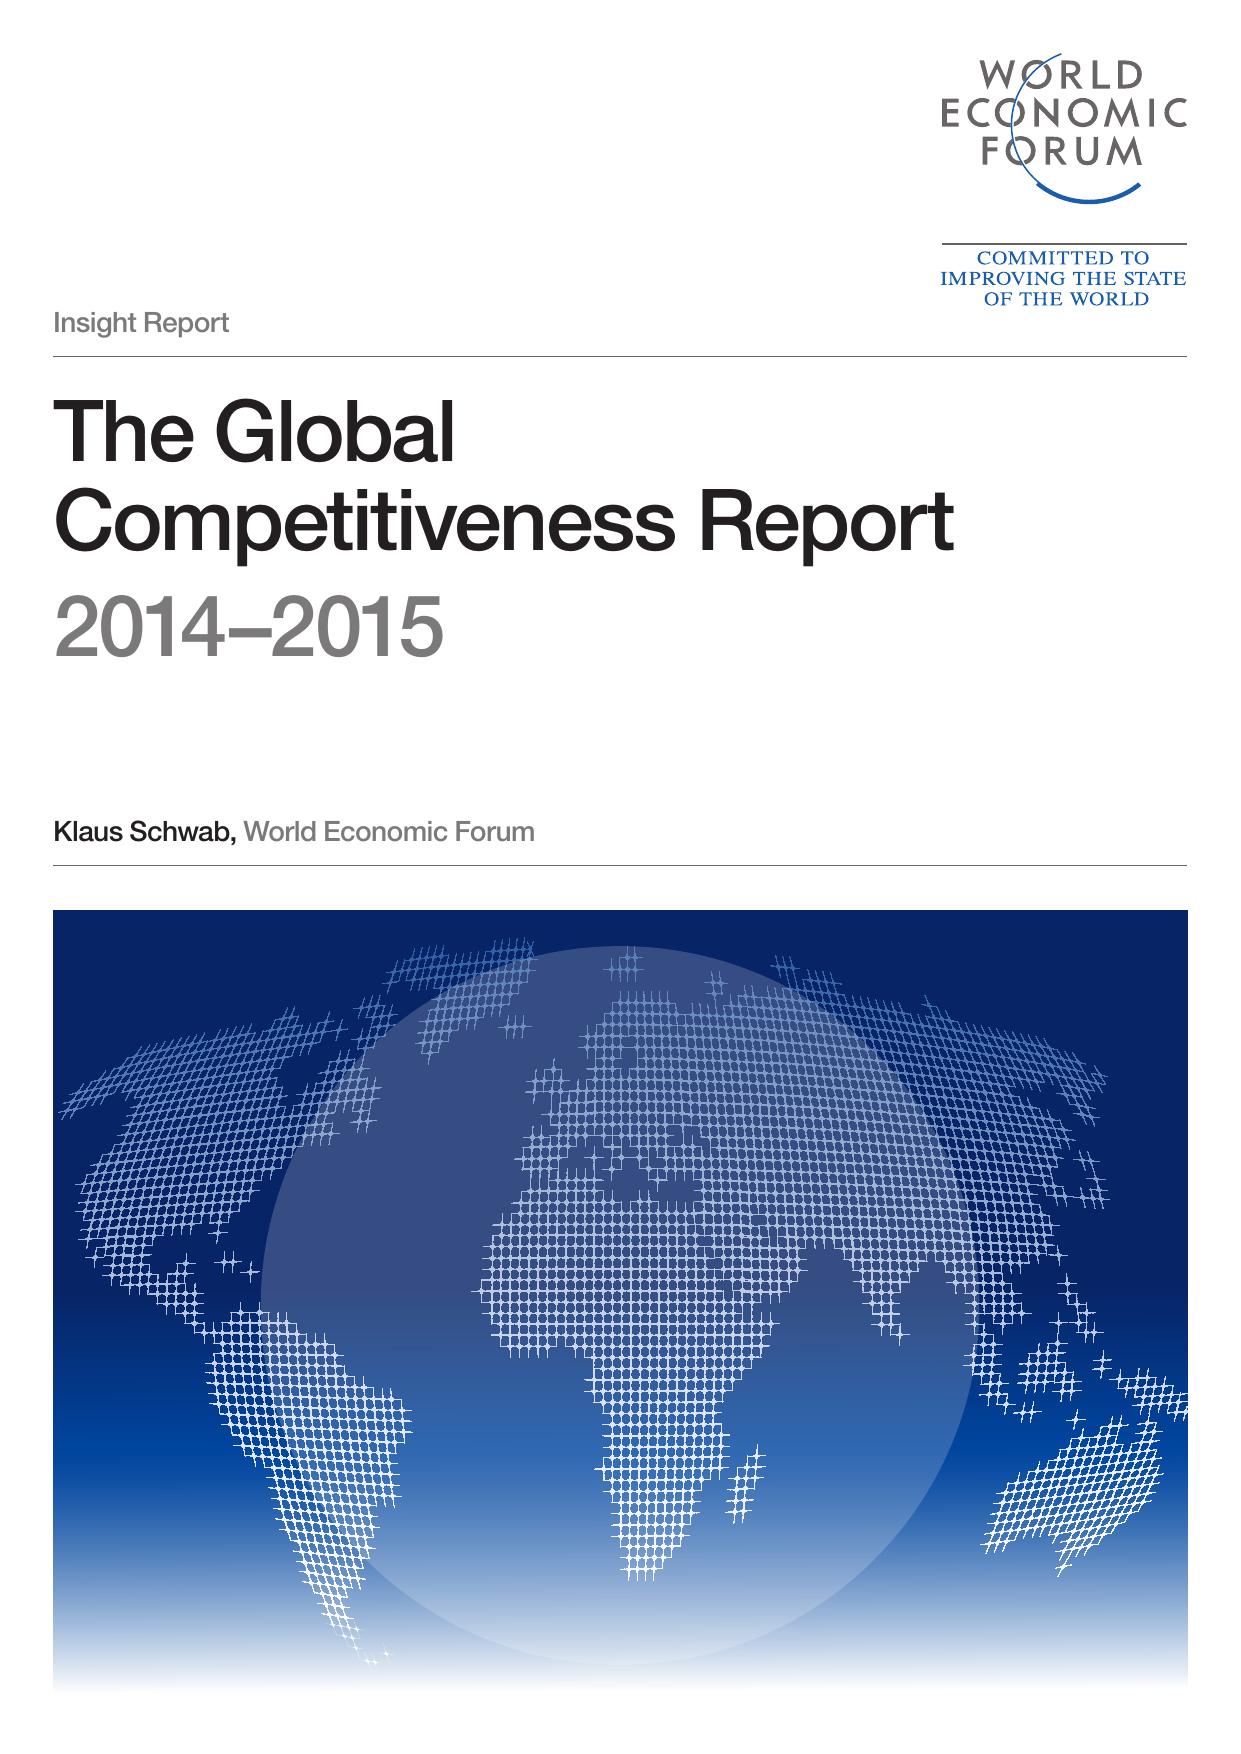 The Global Competitiveness Report 2014-15